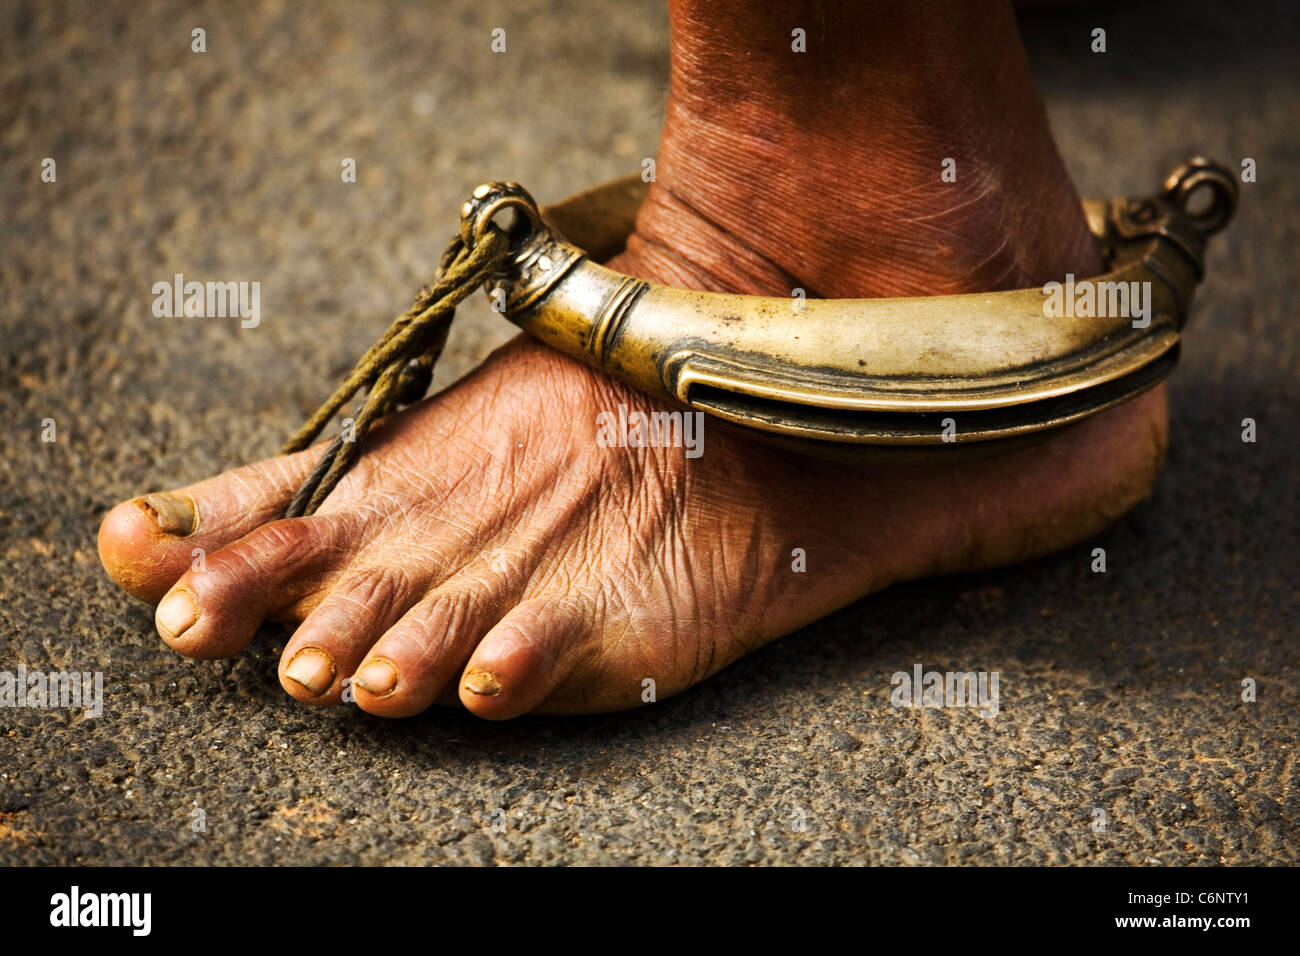 The foot of a Hindu man wearing a brass object on his foot in Trichur (Thrissur) in Kerala, India. Stock Photo